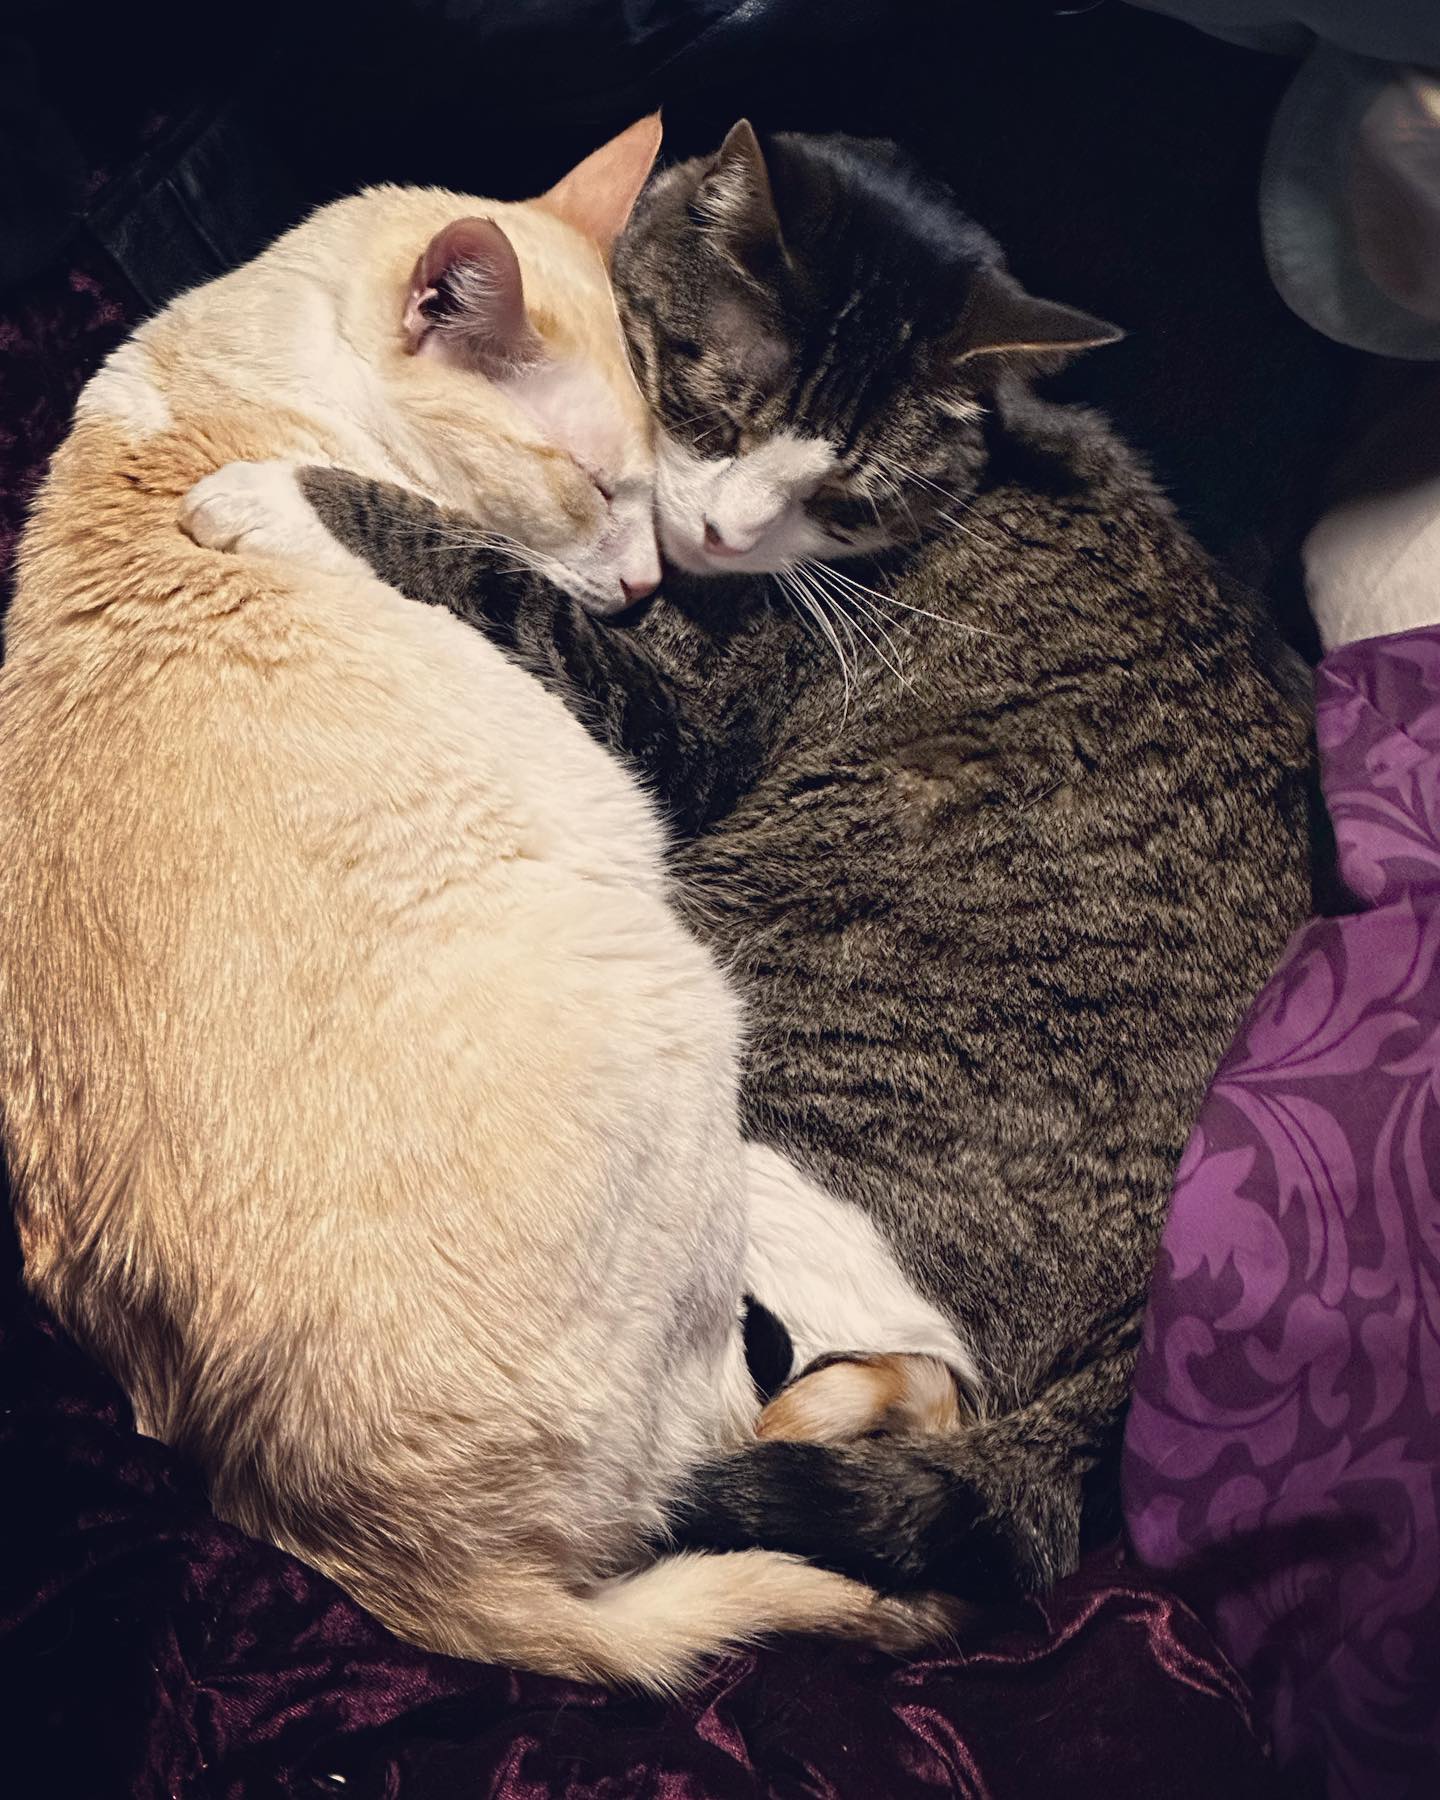 In honor of Gemini season: my baby cats😍 Literally the cutest most loving creatures in the whole world 🥹 #yourewelcome #gemini #geminiseason #catsofinstagram